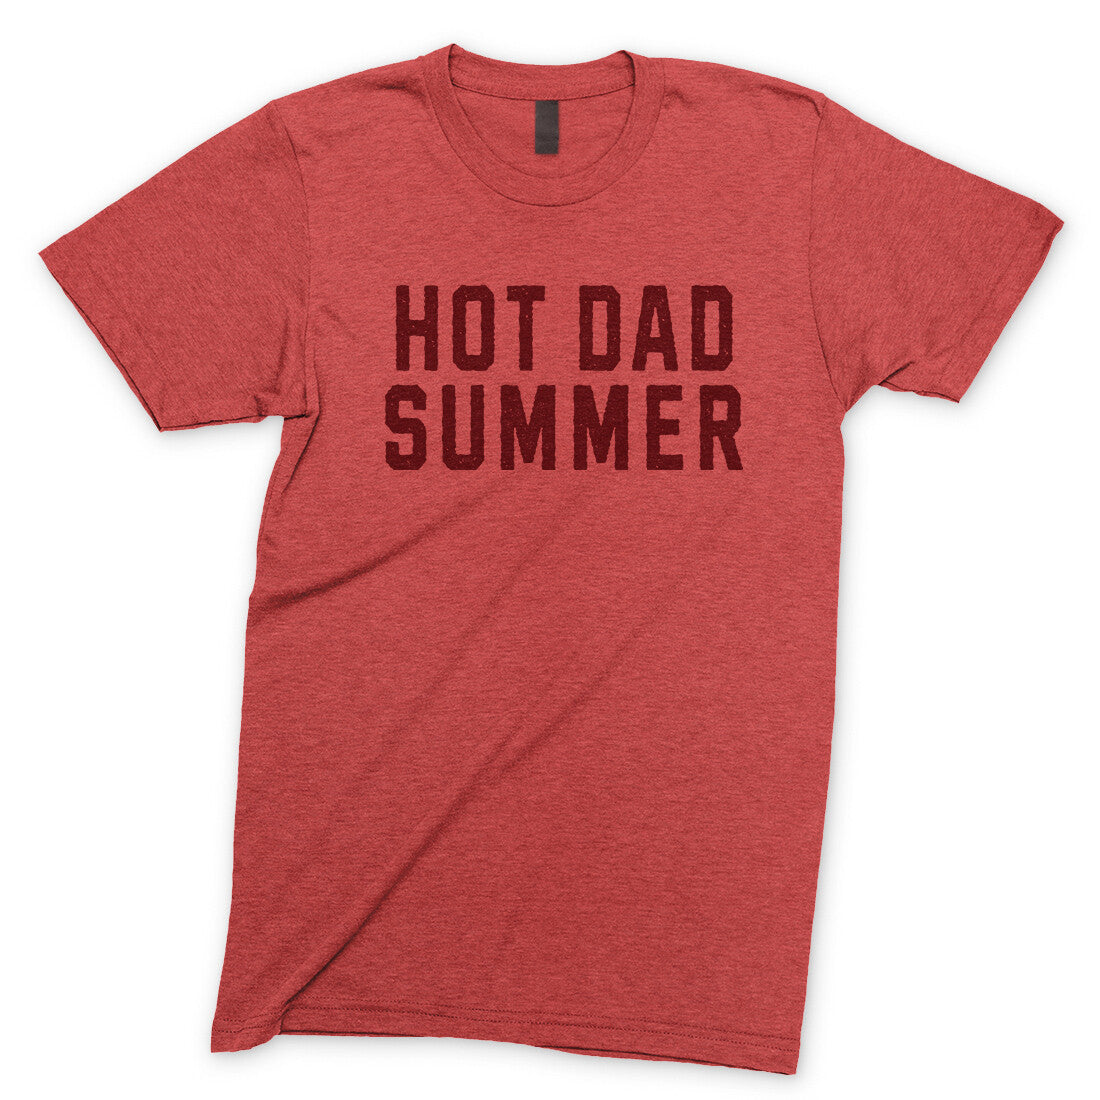 Hot Dad Summer in Heather Red Color